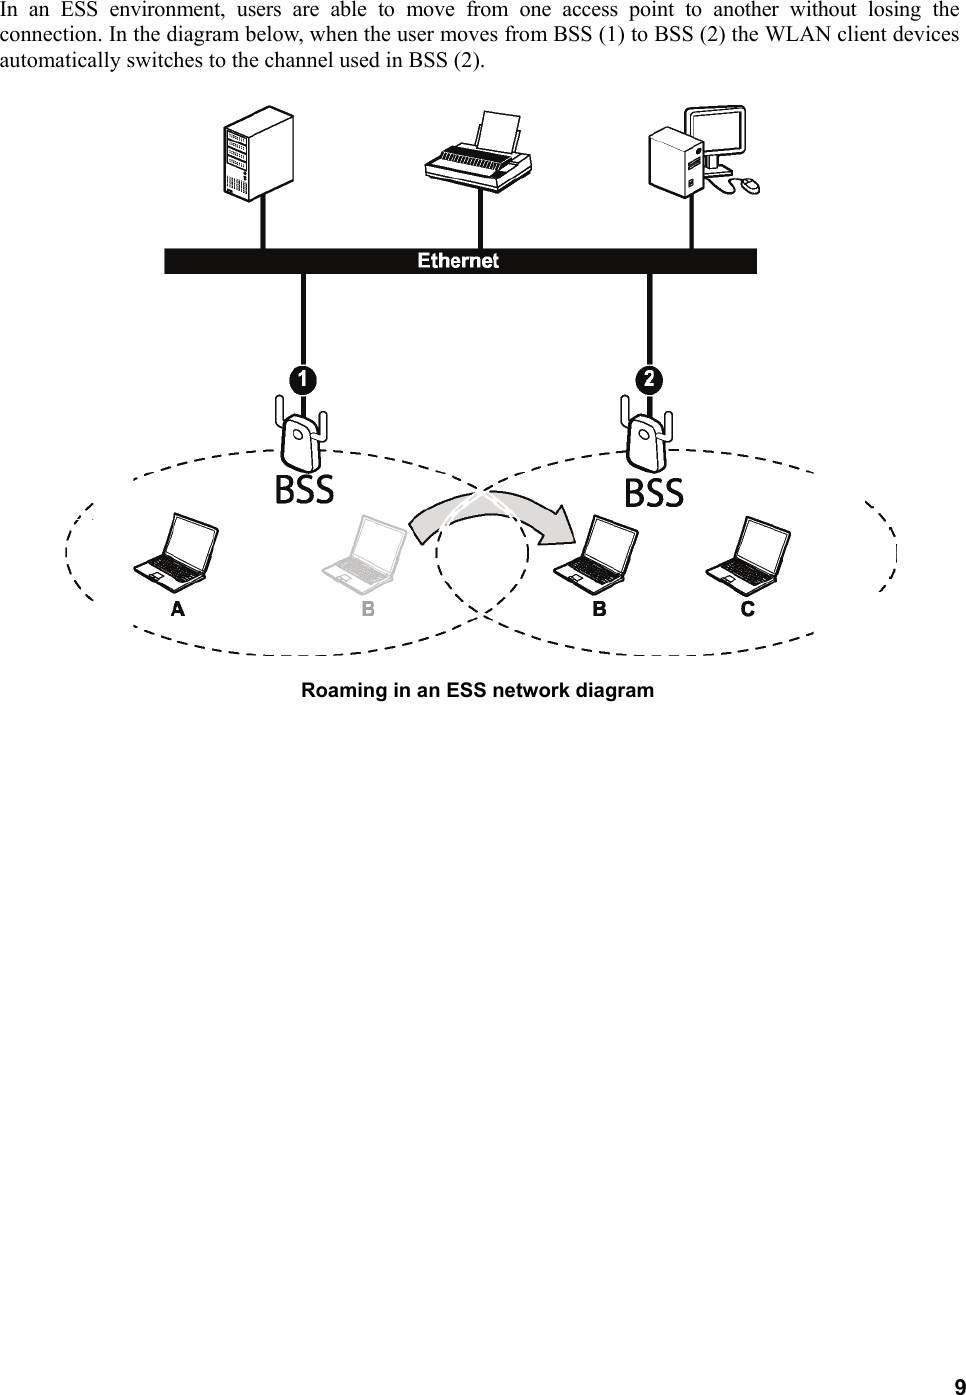 9 In an ESS environment, users are able to move from one access point to another without losing the connection. In the diagram below, when the user moves from BSS (1) to BSS (2) the WLAN client devices automatically switches to the channel used in BSS (2).  Roaming in an ESS network diagram 